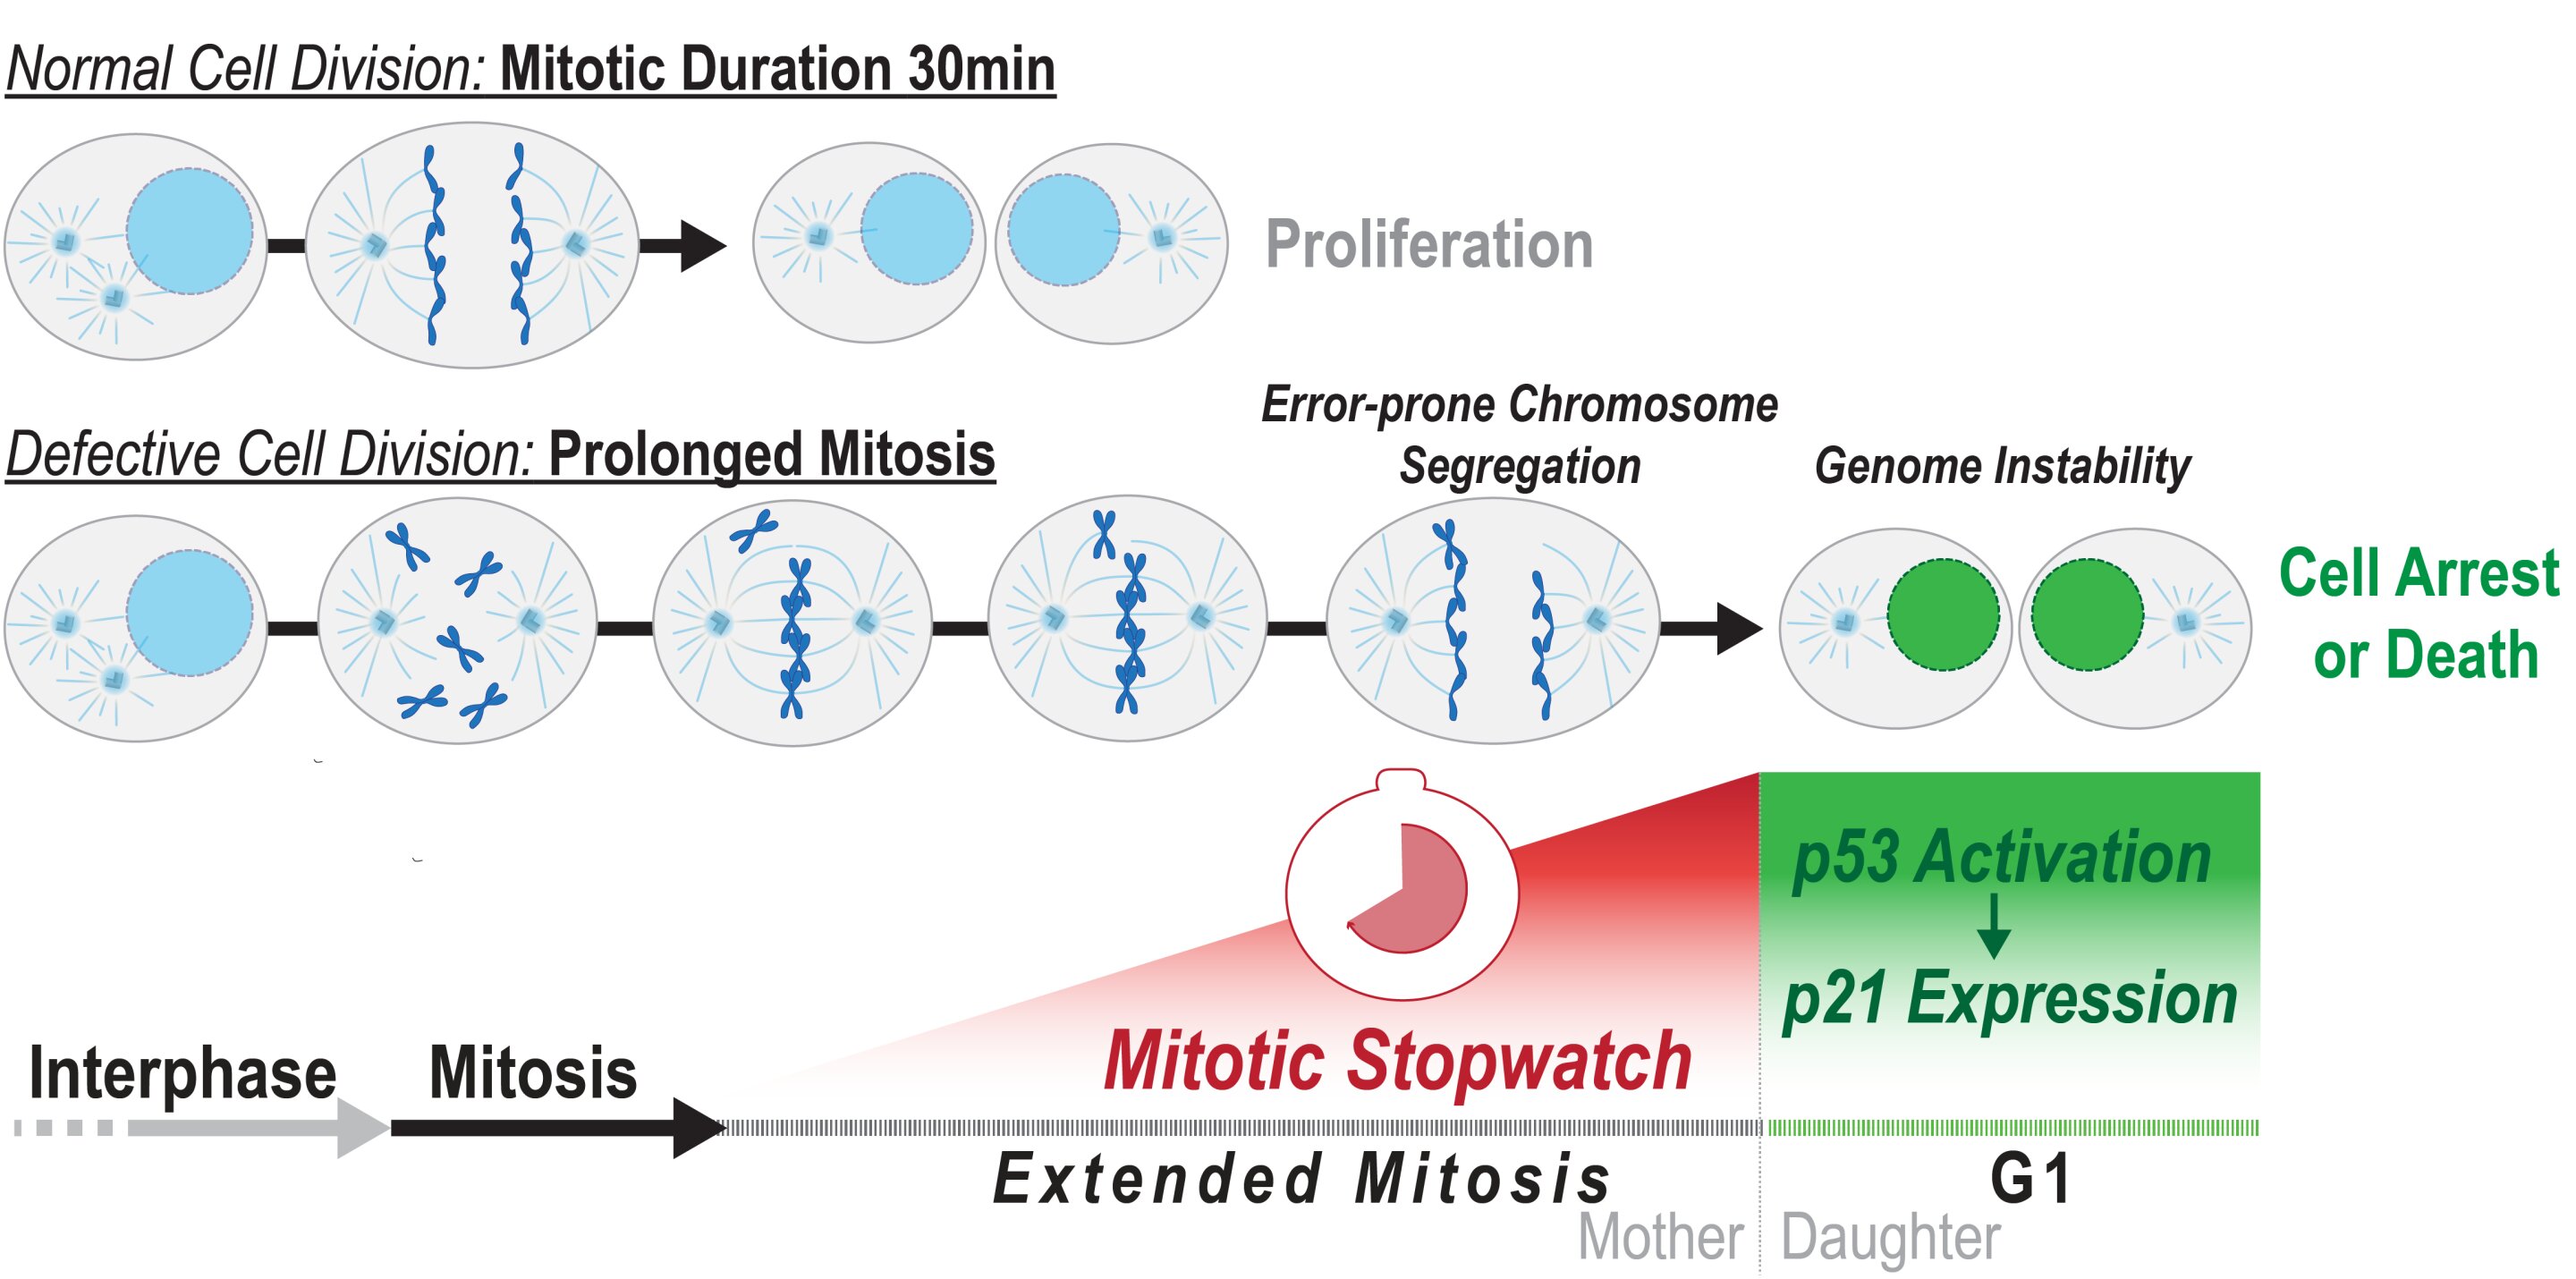 Memories of mitosis: Molecular mechanism that detects defects during cell division could aid cancer treatment